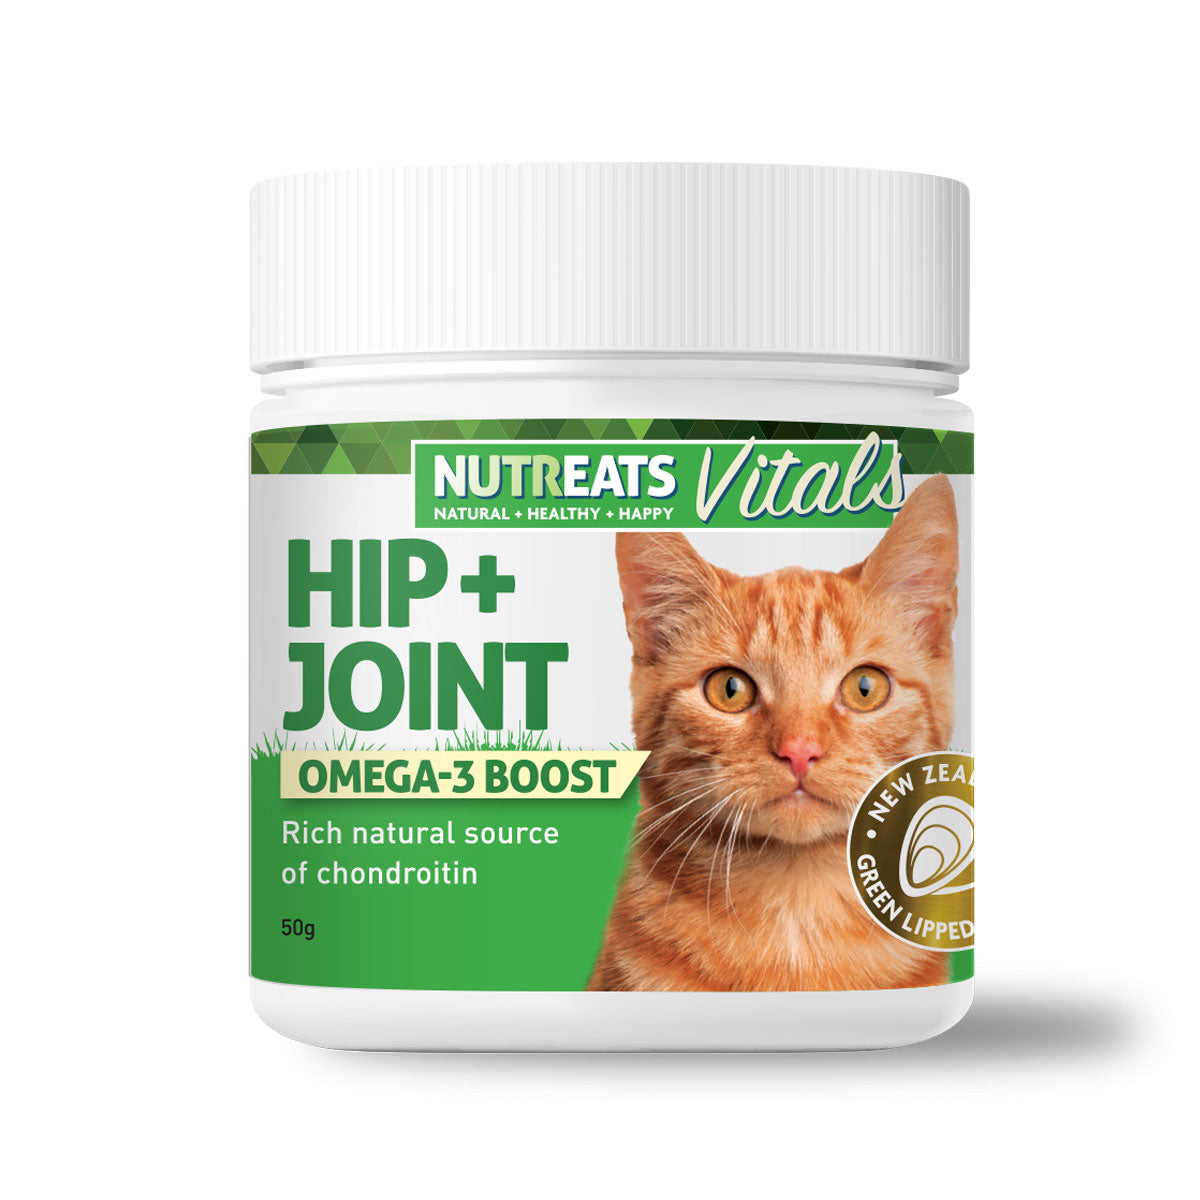 Nutreats Vitals Hip & Joint - a rich source of chondroitin supporting healthy bones, joints and skin for cats. Packed with Omega 3 this dietary supplement for cats can be sprinkled on their food to give them a healthy nutritional boost.